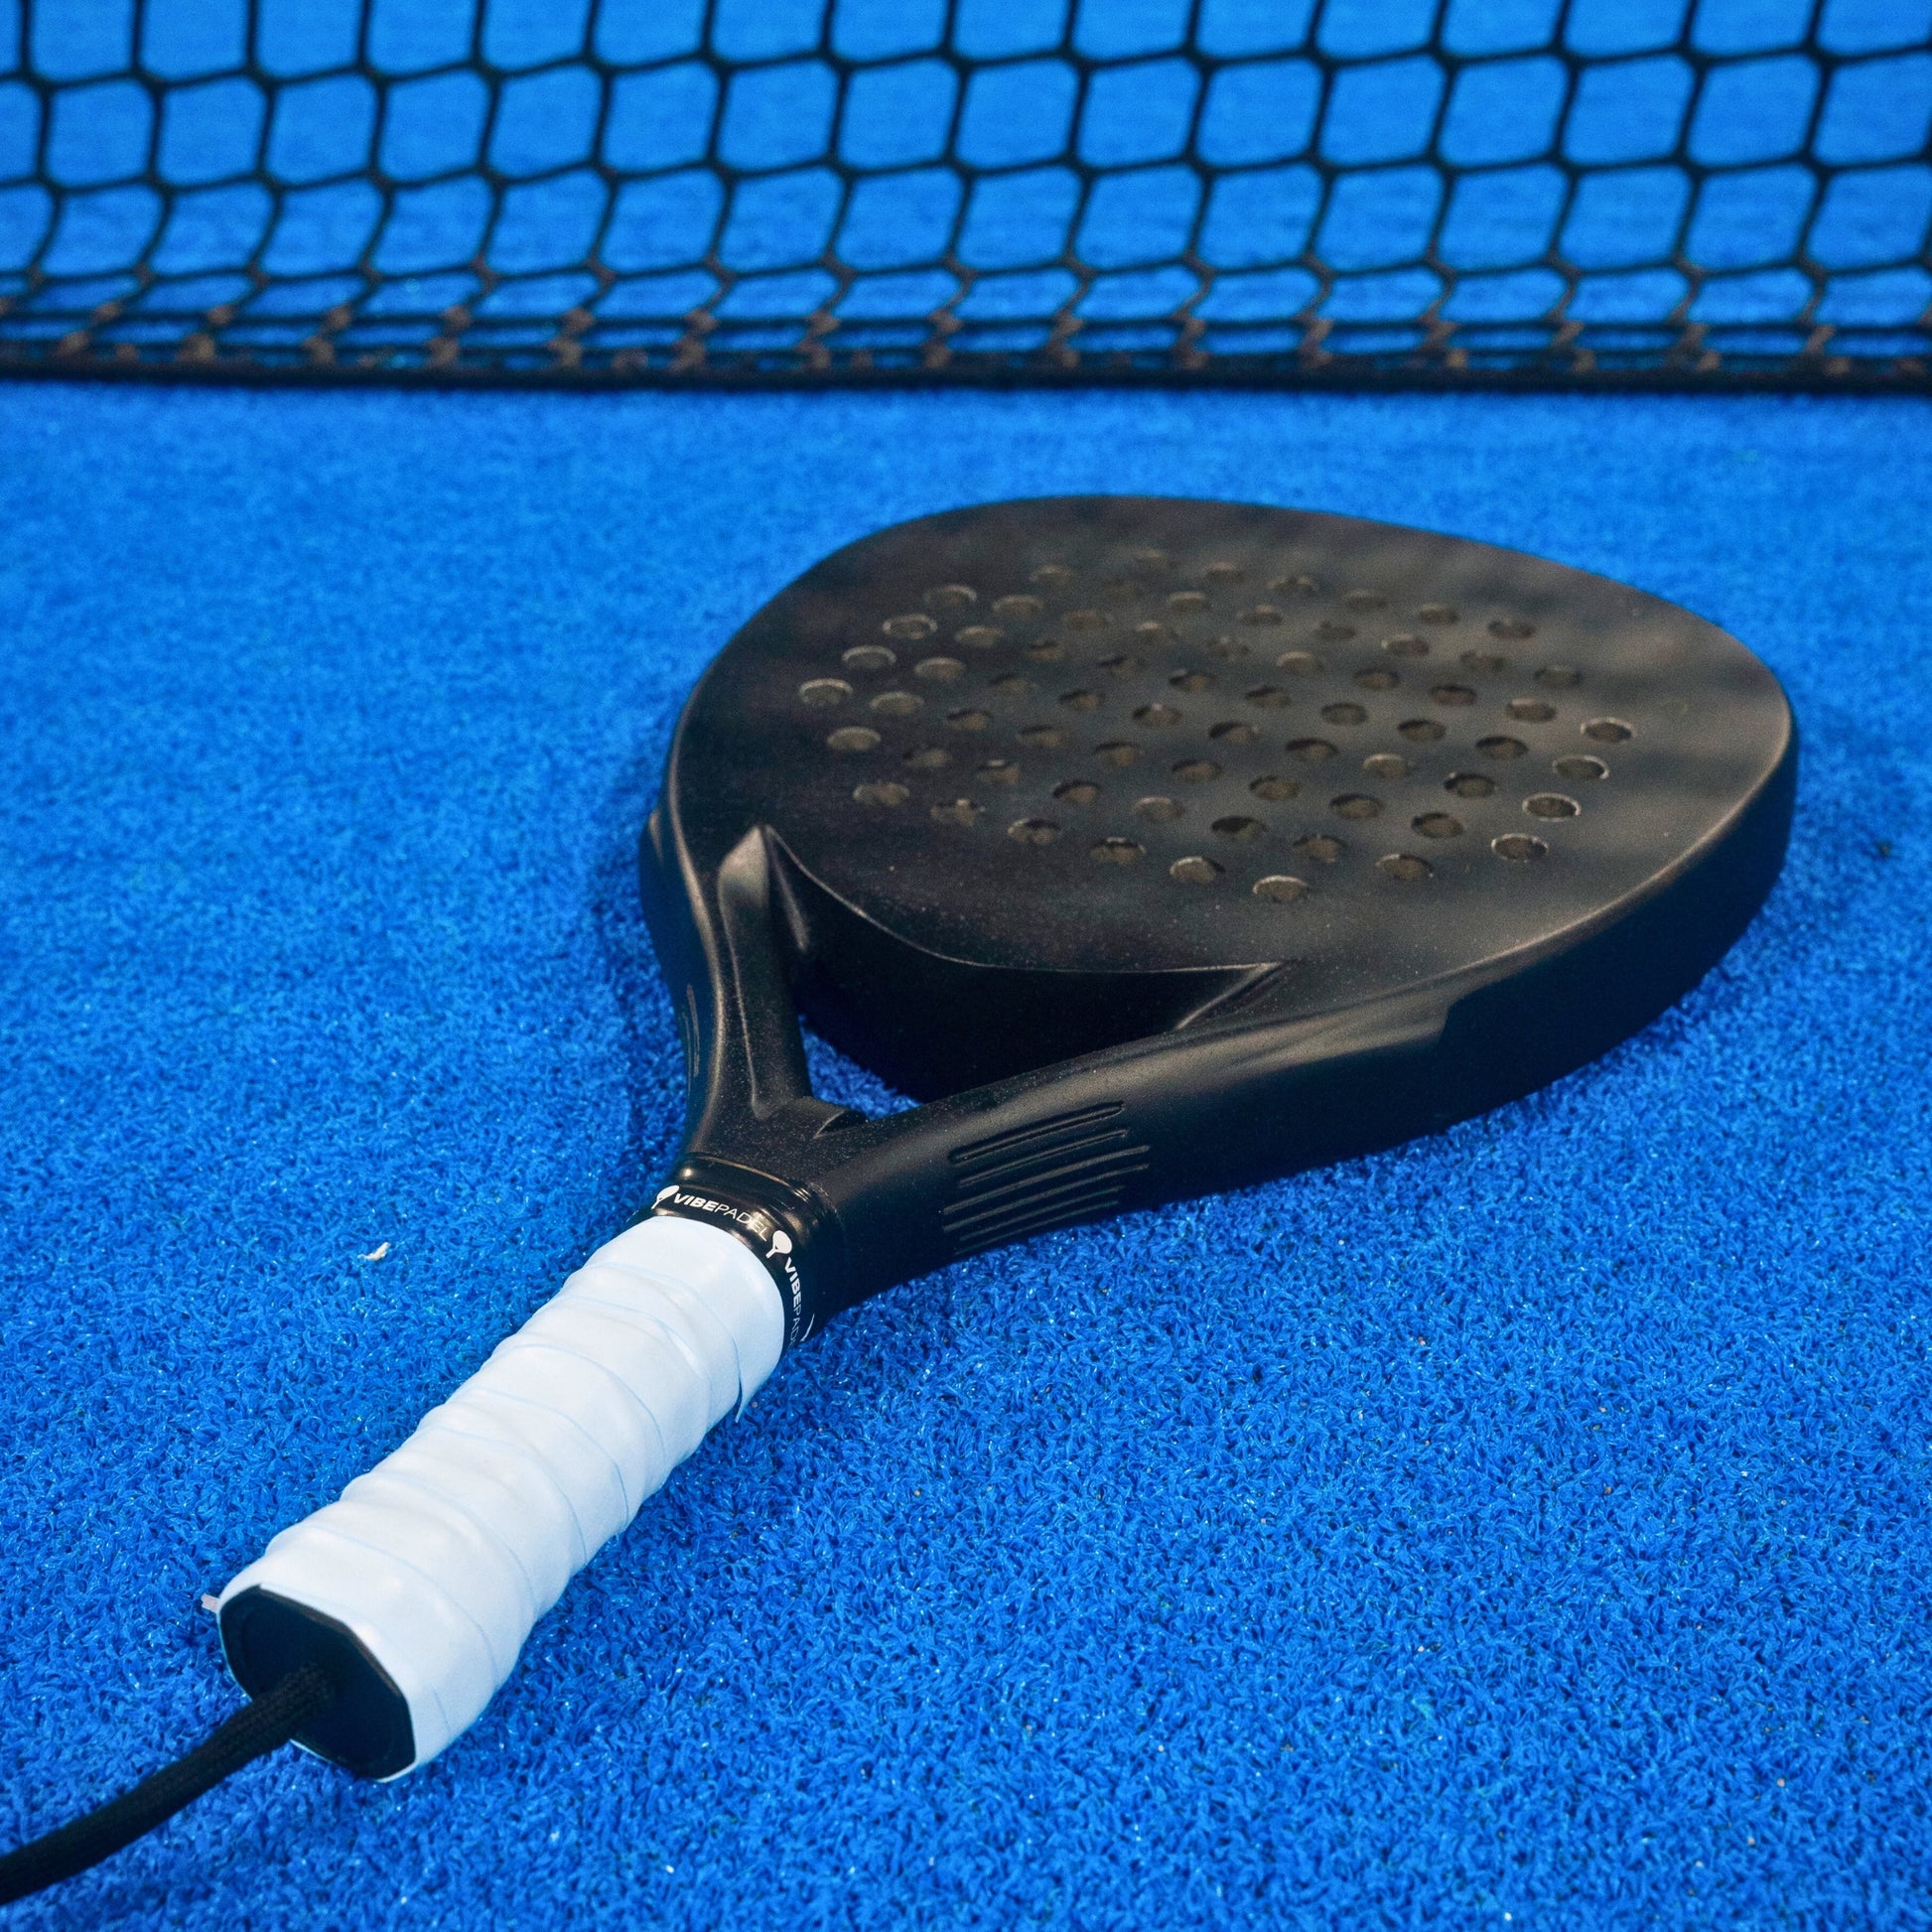 How to Add an Overgrip to a Padel Racket